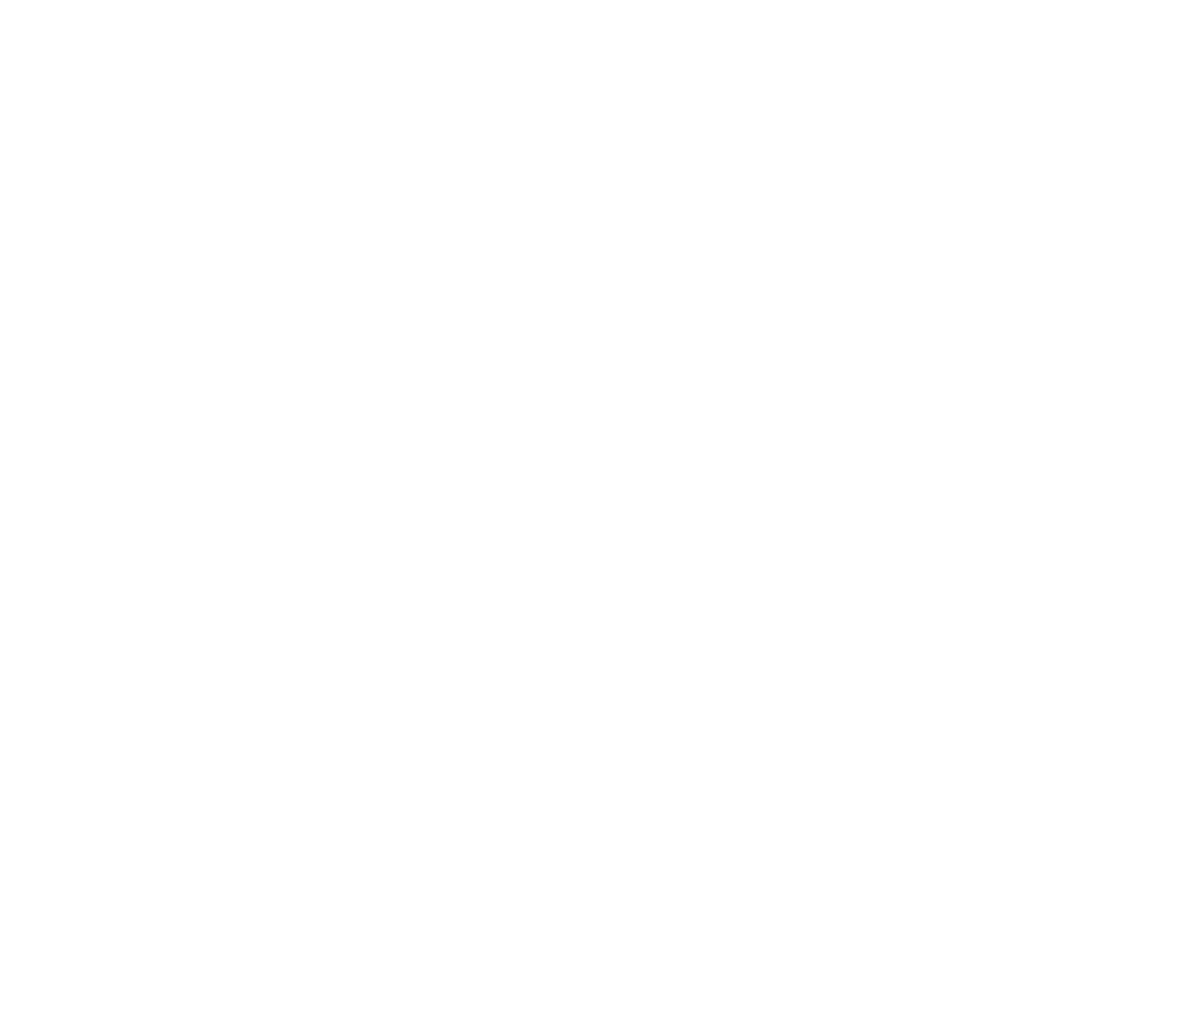 Jewelry Buyer &amp; Loans in Orlando since 1989